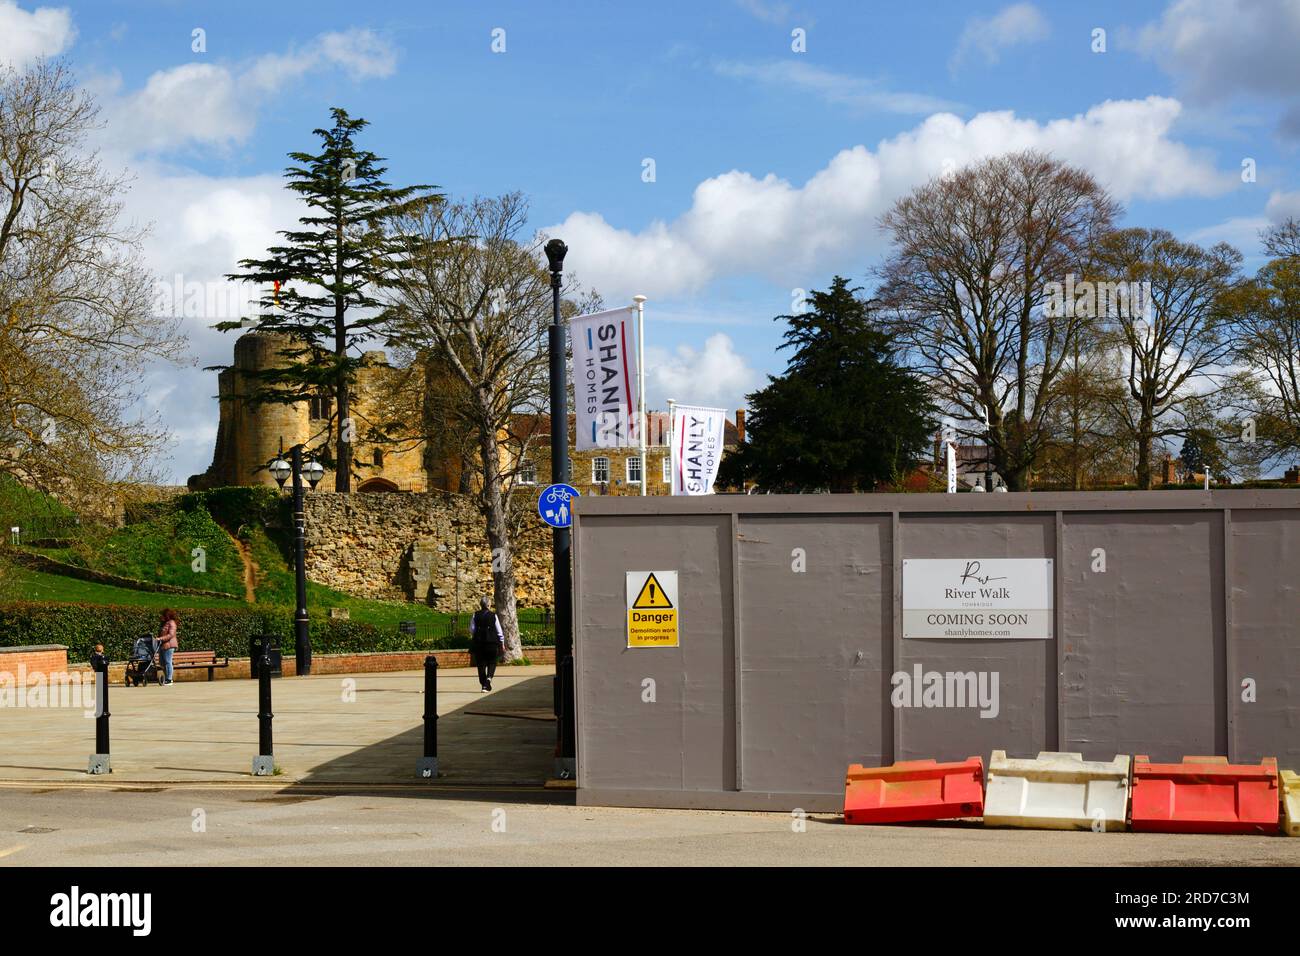 River Walk and corner of construction site for new Shanly Homes River Walk housing complex, castle gatehouse in background, Tonbridge, Kent, England Stock Photo